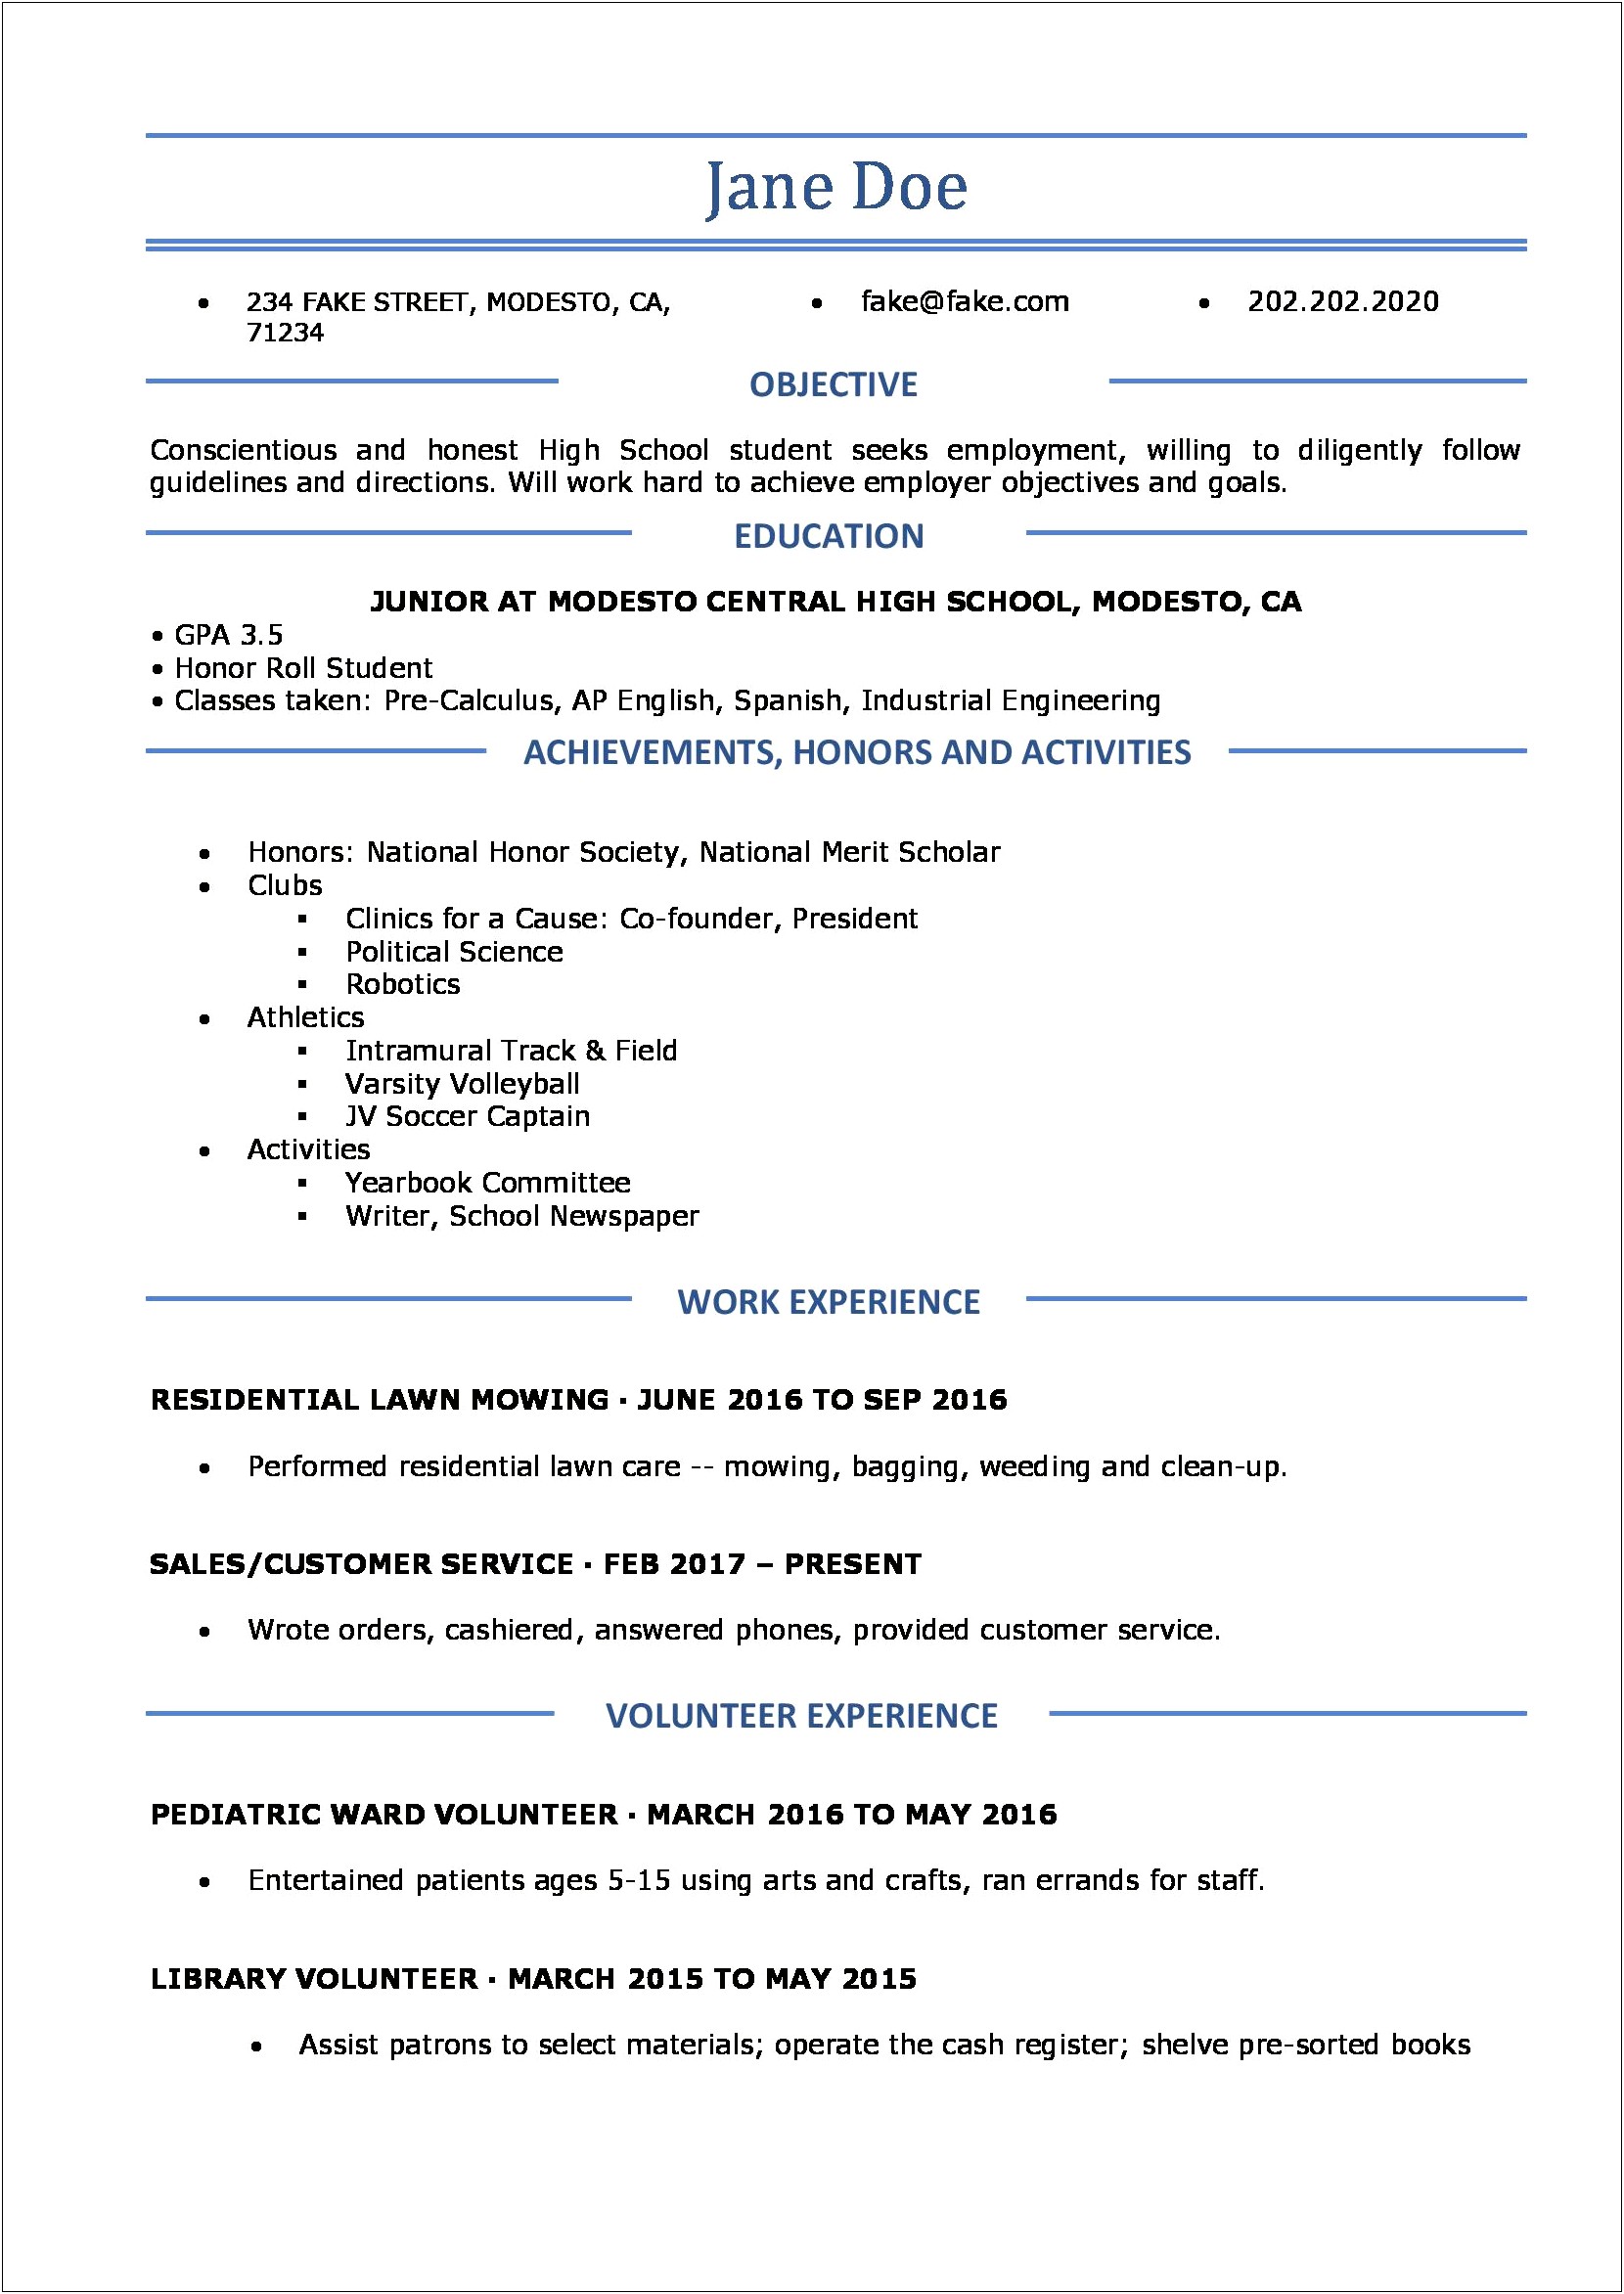 Resume For Applying To High School